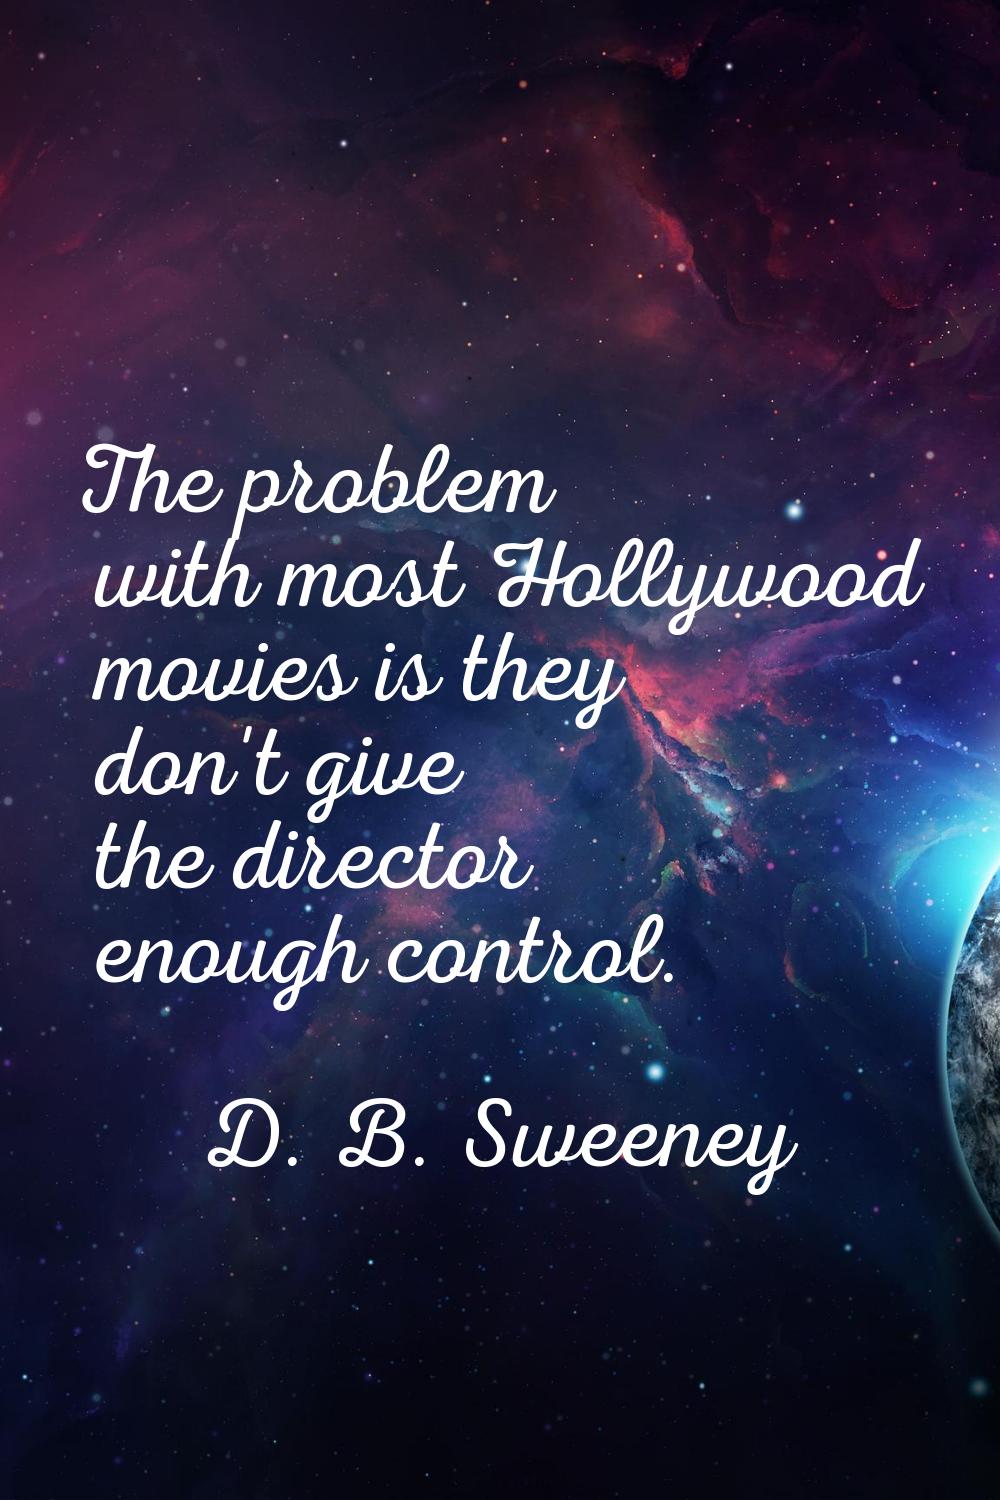 The problem with most Hollywood movies is they don't give the director enough control.